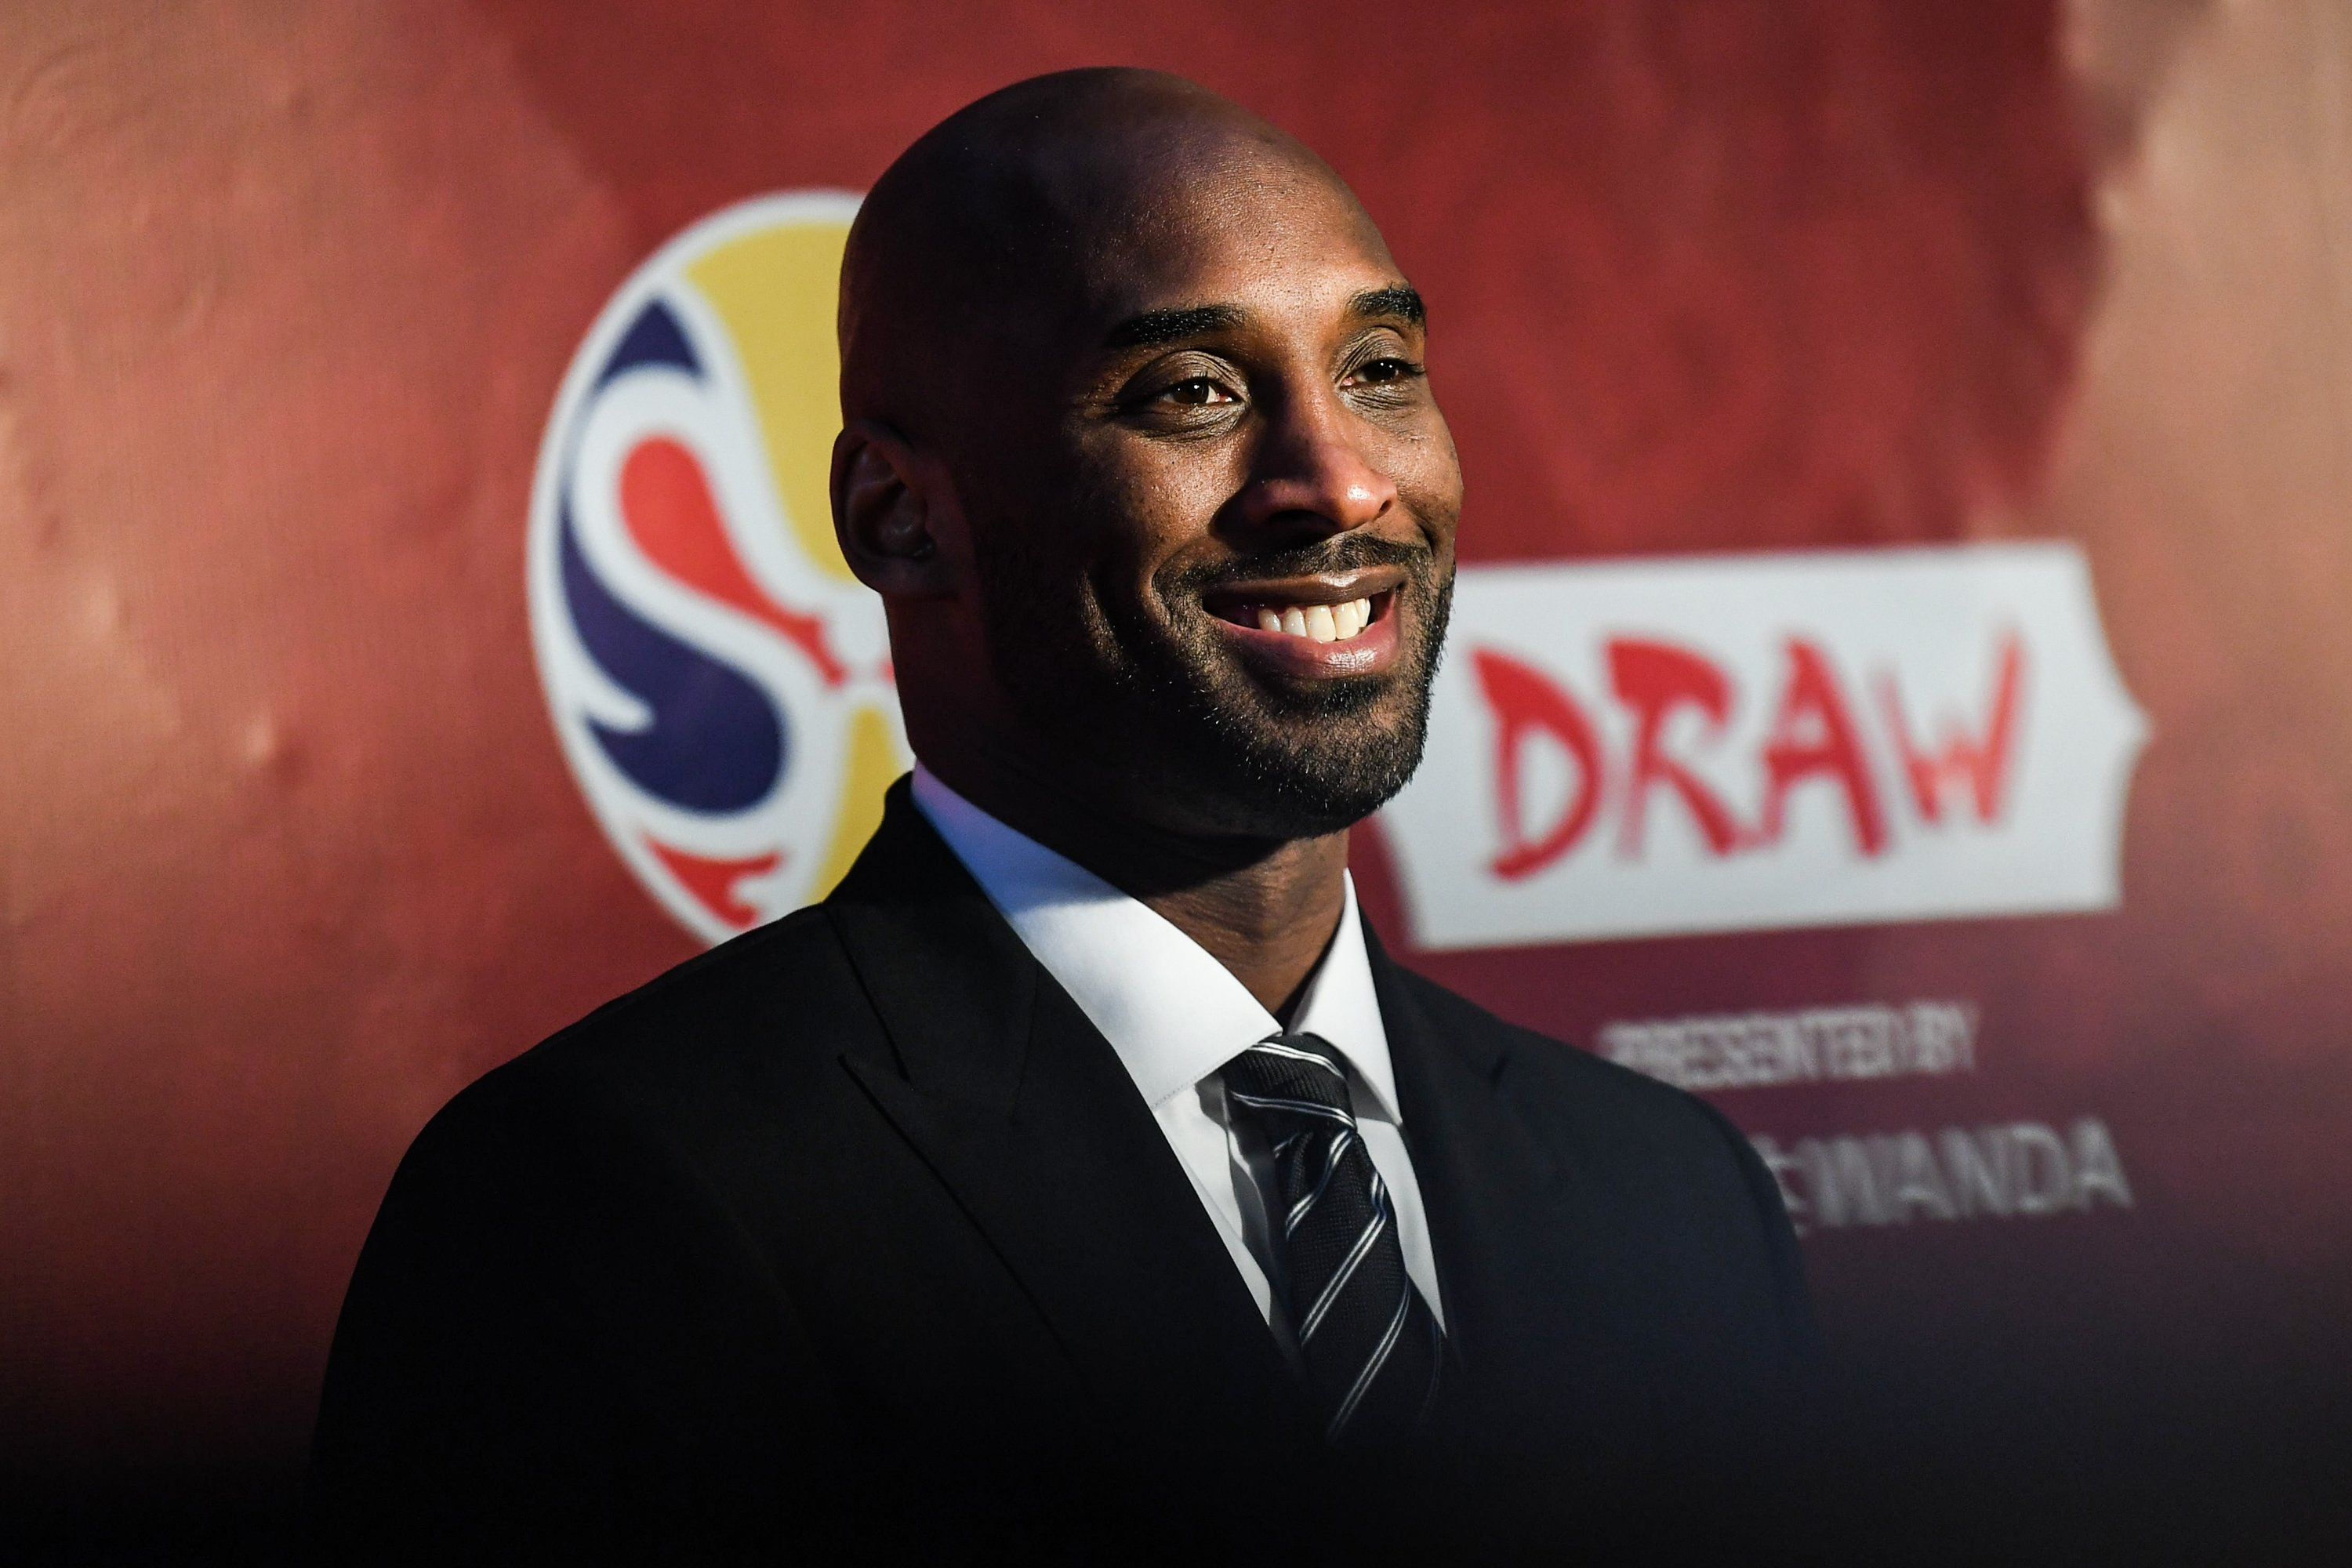 Kobe Bryant during the FIBA Basketball World Cup 2019 draw ceremony in China in March 2019. | Photo: Getty Images